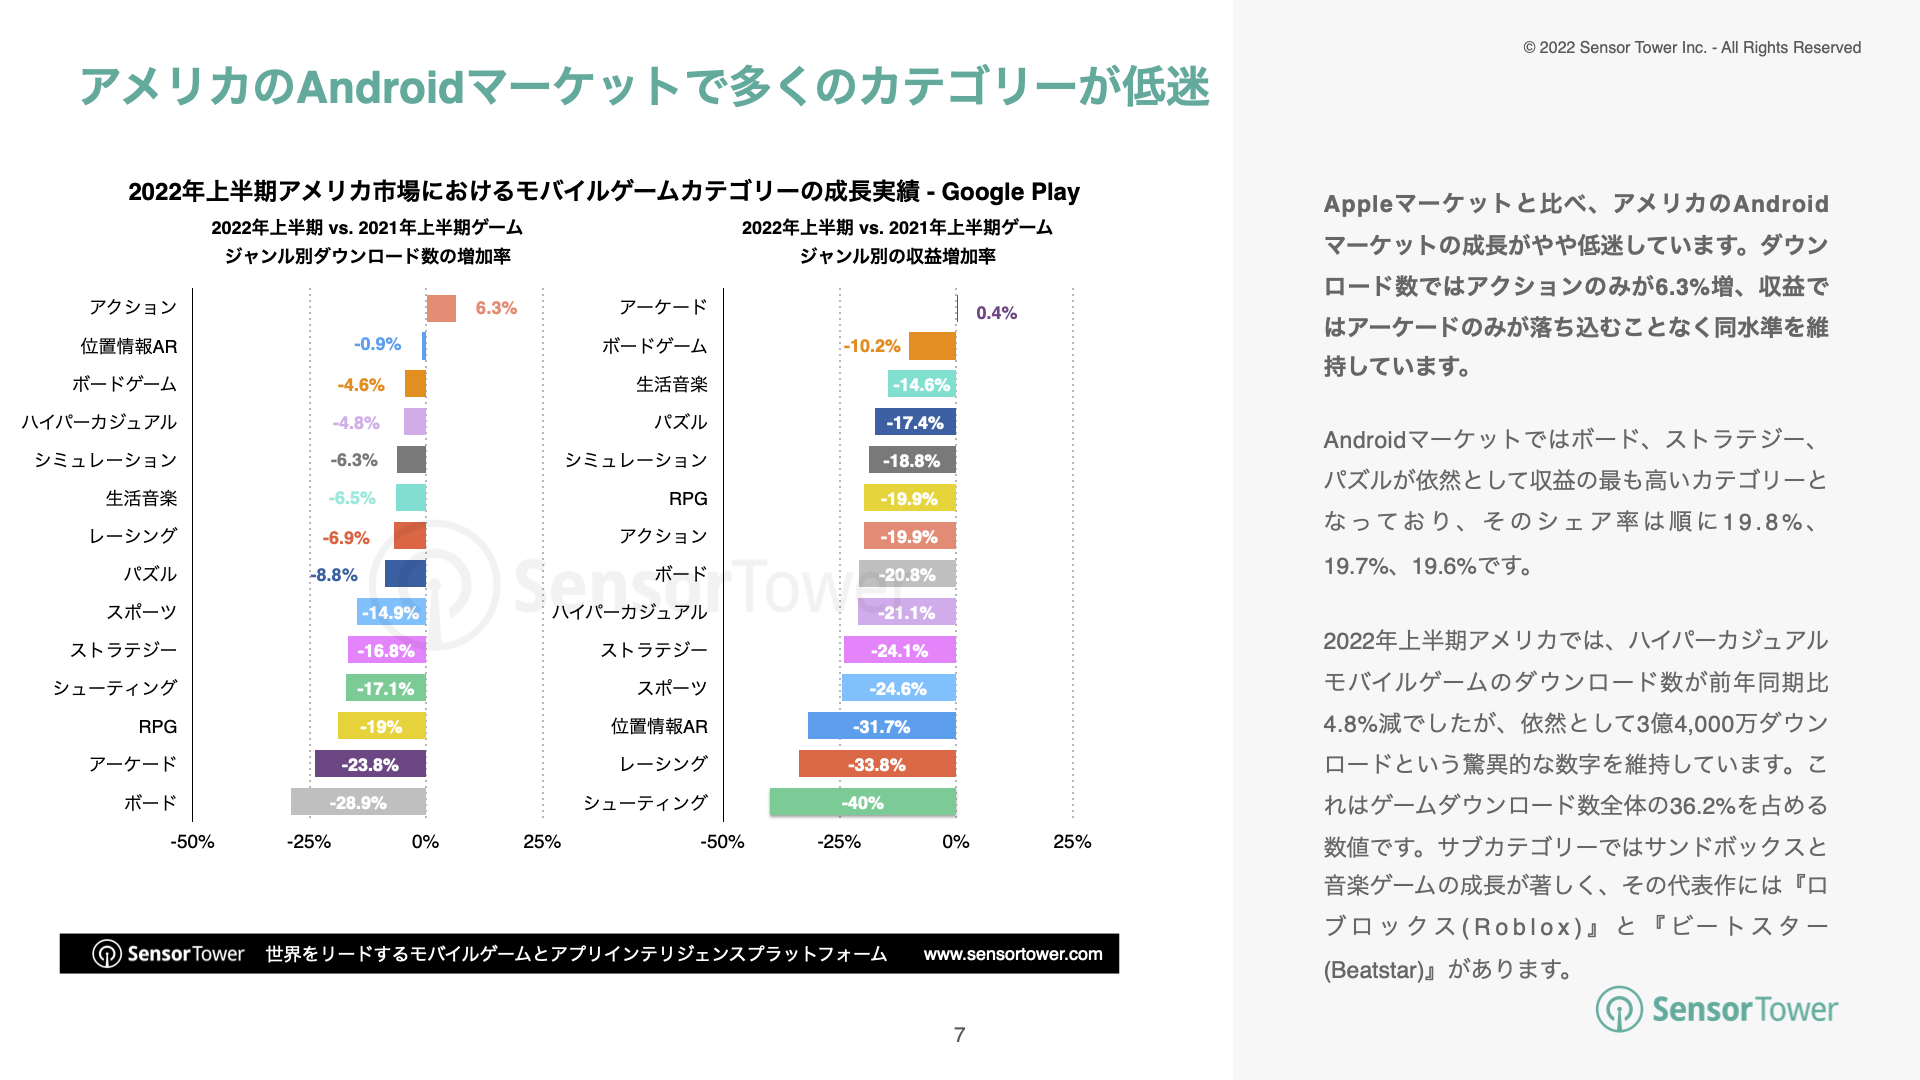 -JP- State of Mobile Games in US 2022H1(pg7)